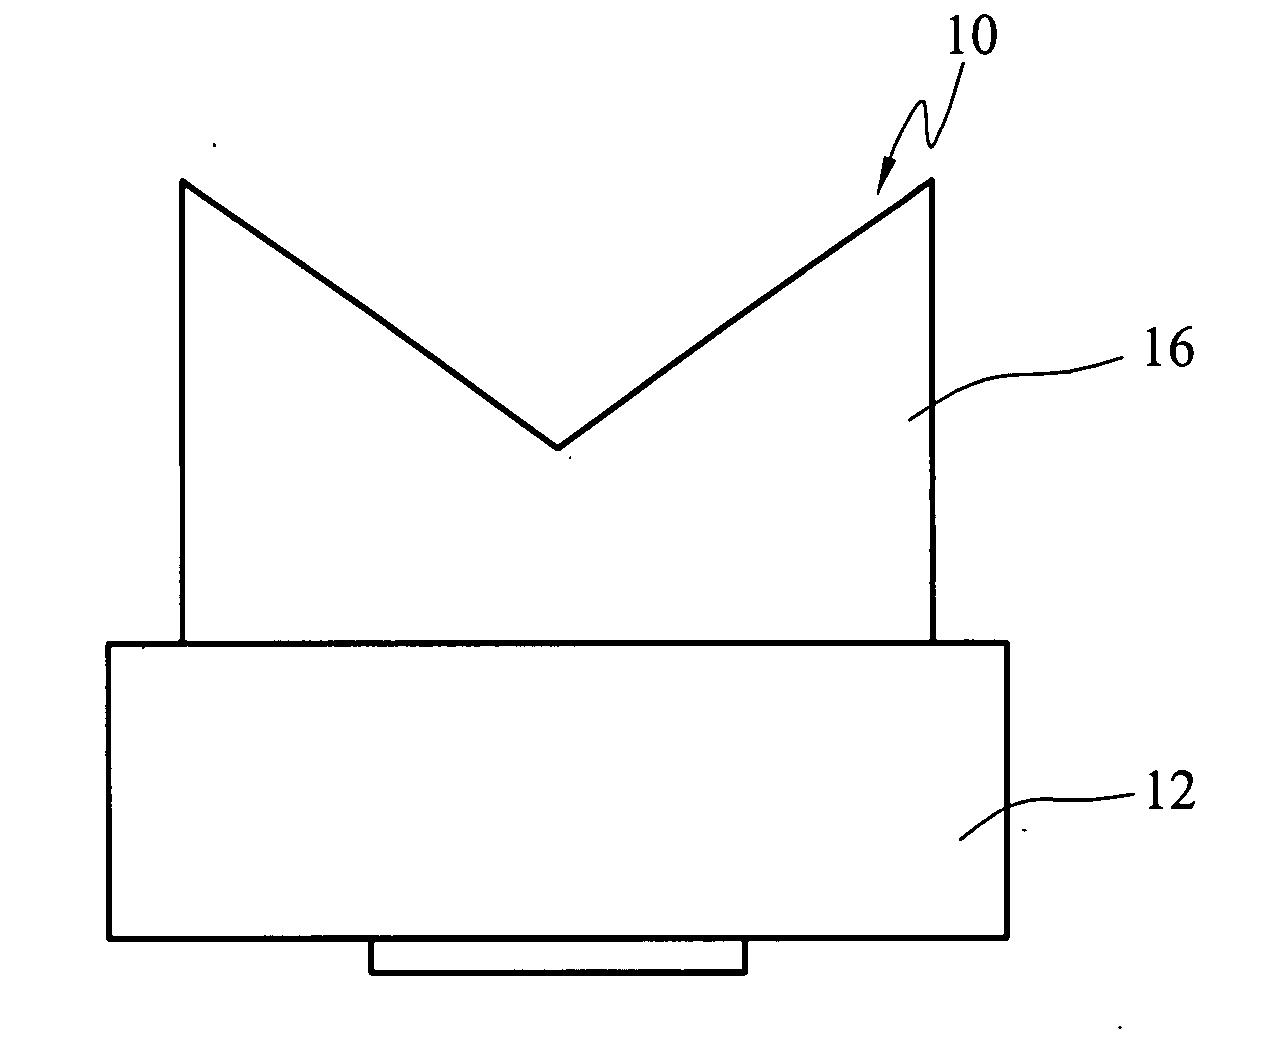 Lens cap and light emitting diode package structure using the same